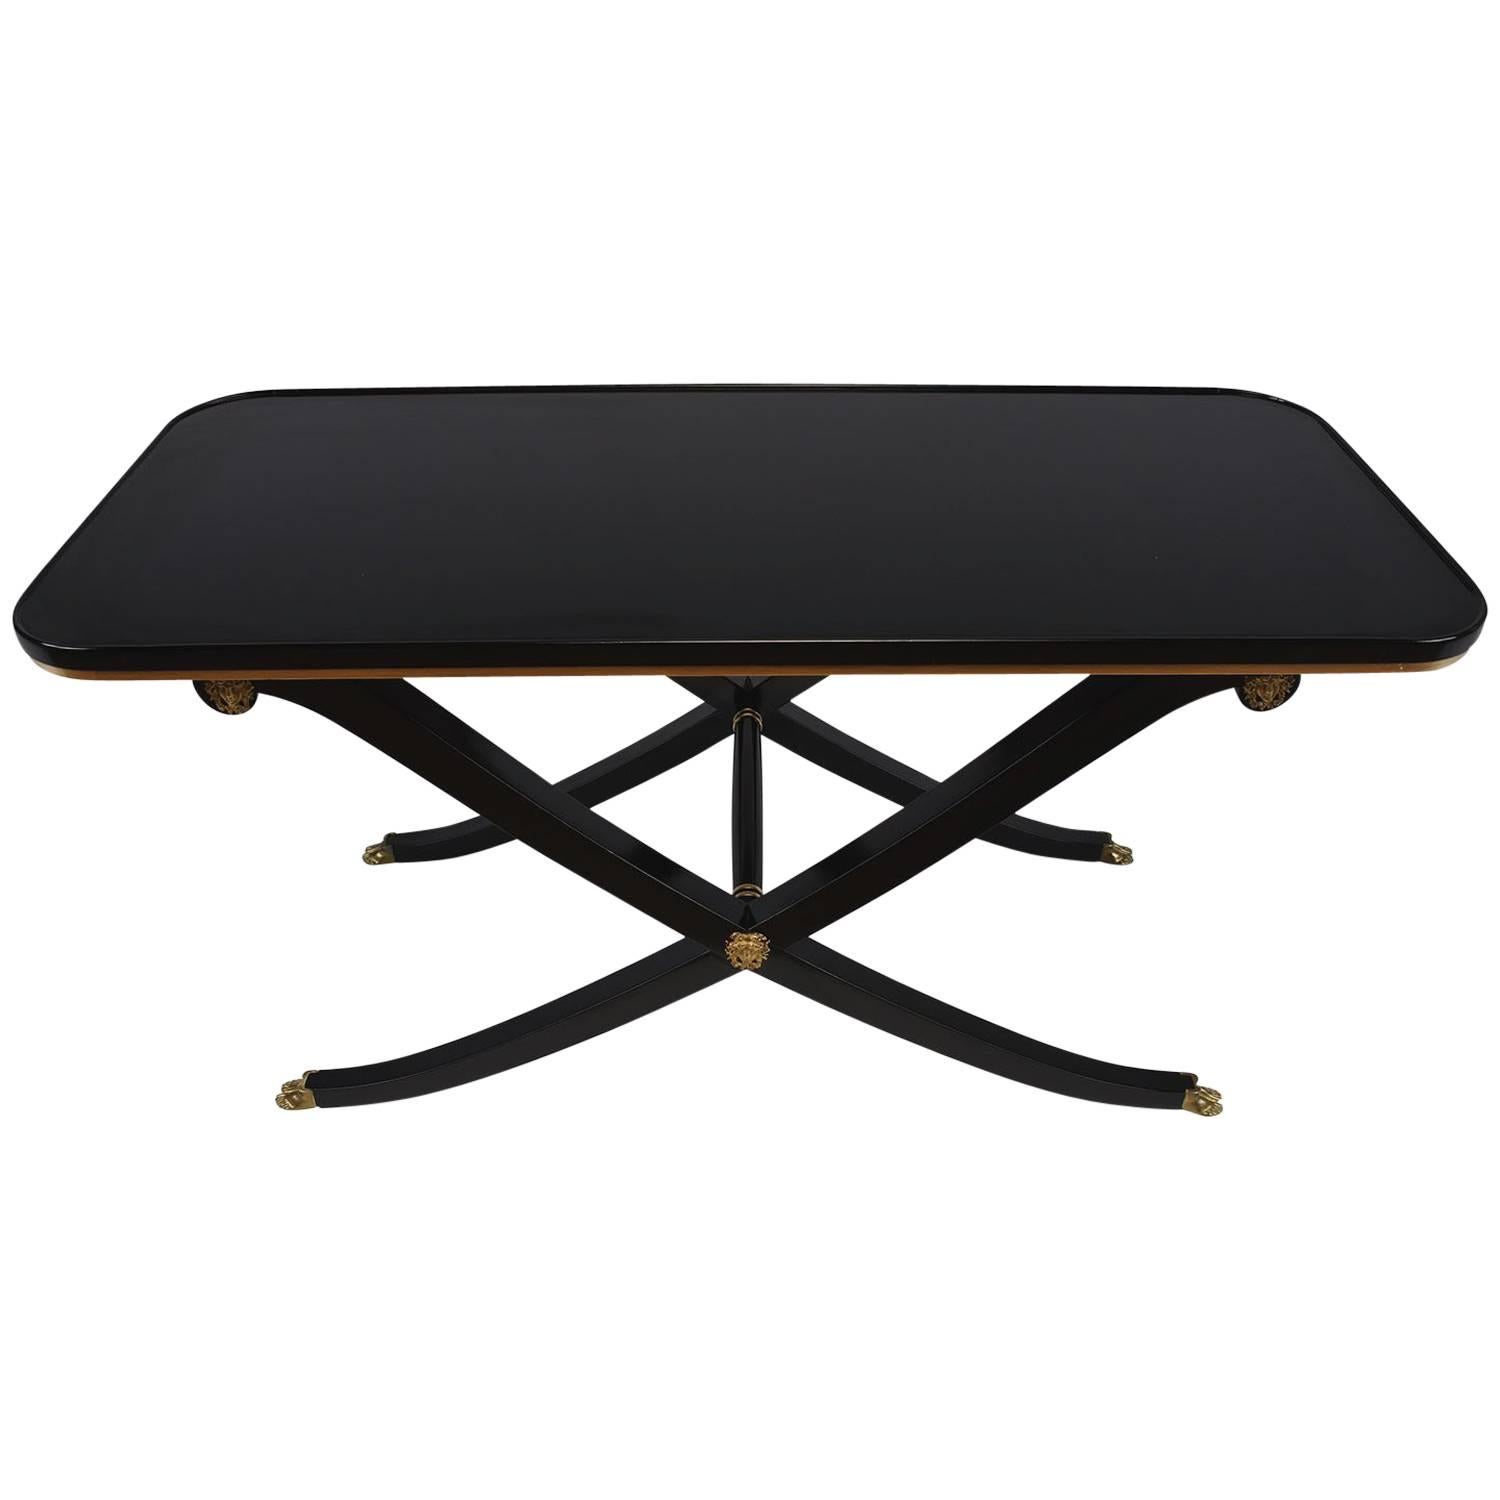 French Empire Style Ebonized Coffee Table